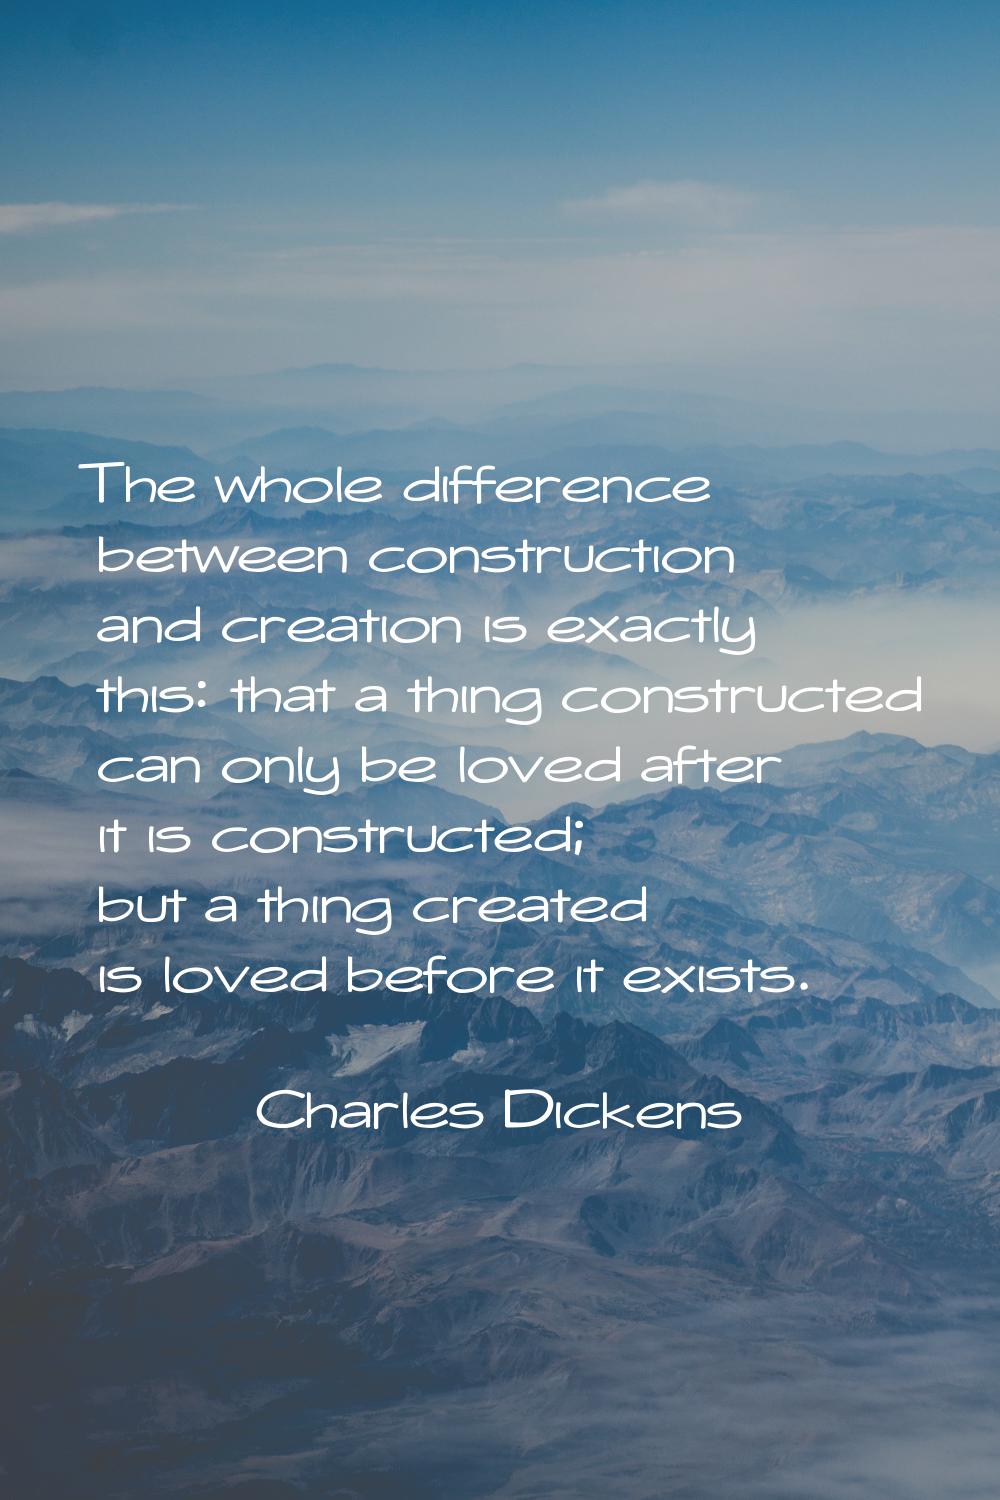 The whole difference between construction and creation is exactly this: that a thing constructed ca